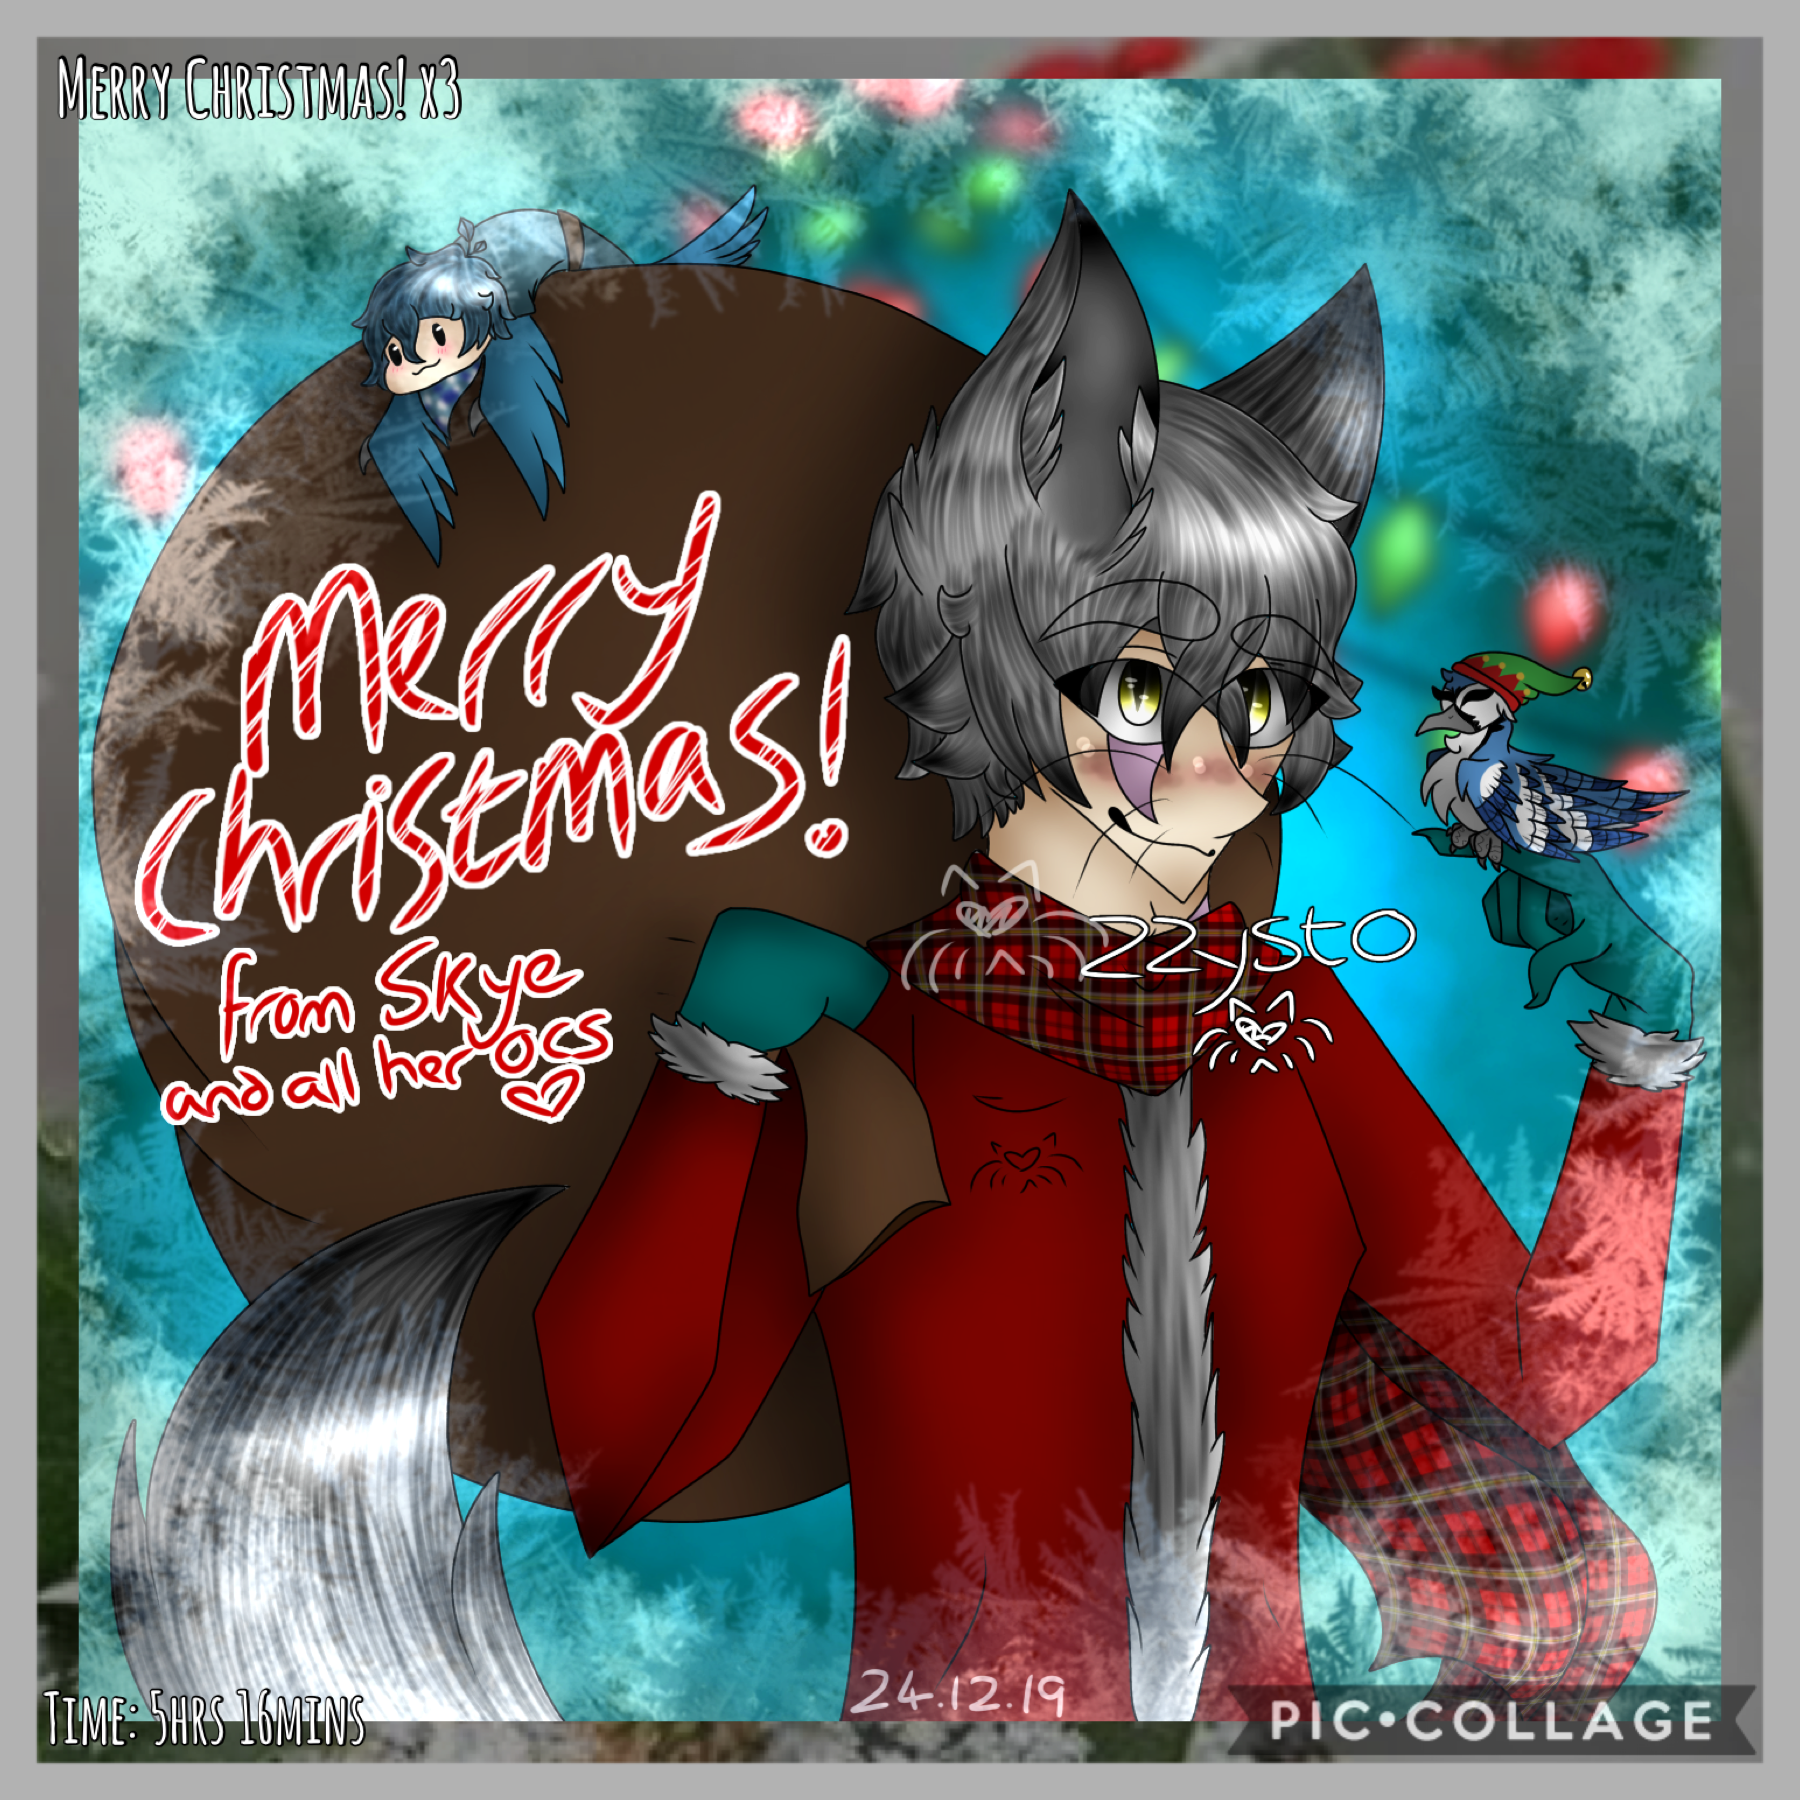 🎄🎁Tap🎁🎄
~Look in remixes~
Merry Christmas!
May you all have a wonderful day with family, friends and get everything you asked for!!
:3